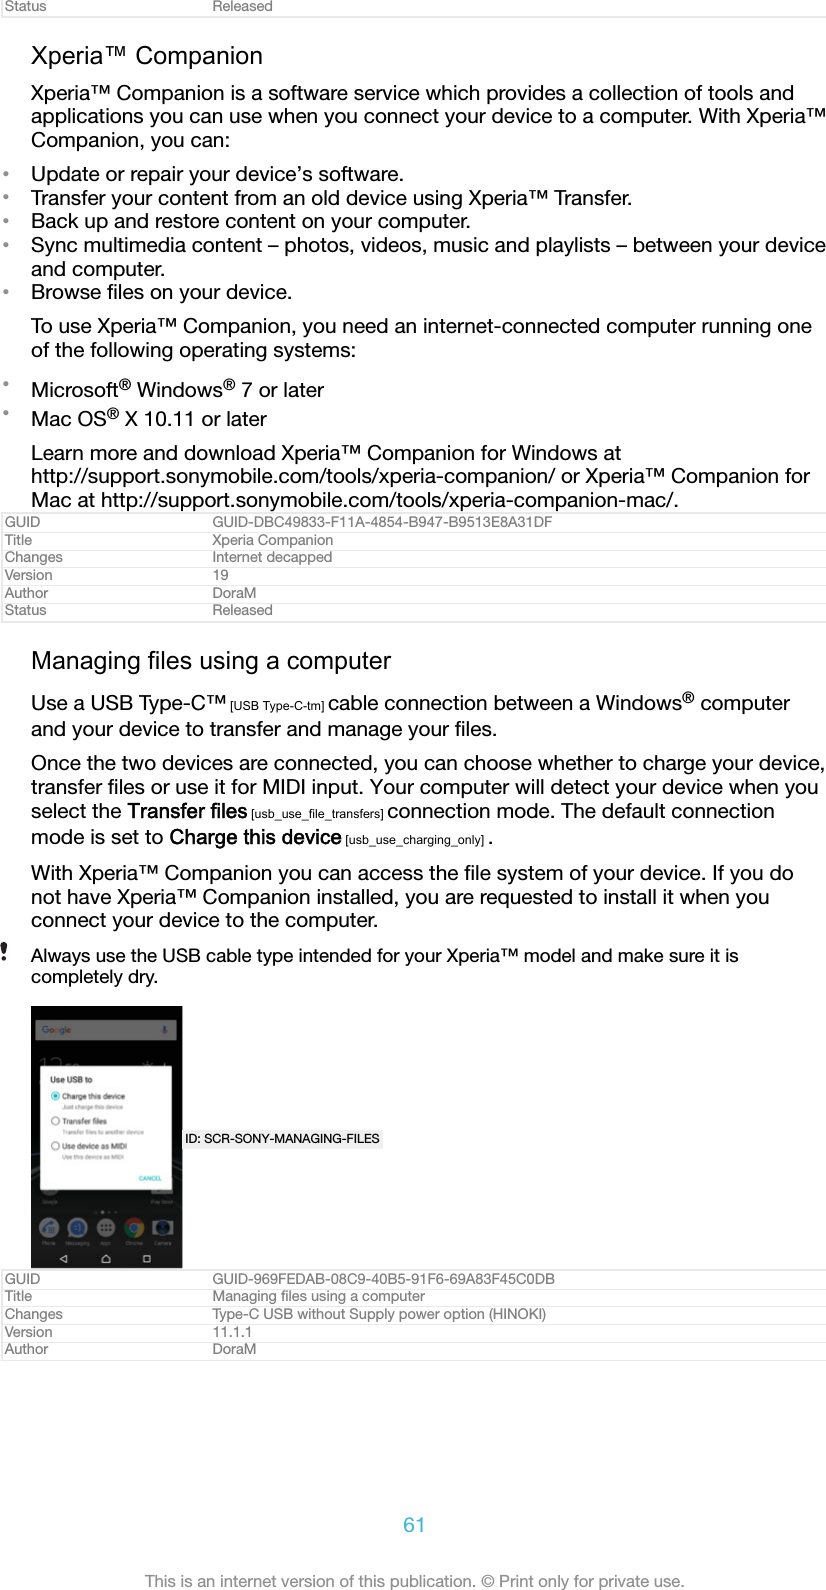 Status ReleasedXperia™ CompanionXperia™ Companion is a software service which provides a collection of tools andapplications you can use when you connect your device to a computer. With Xperia™Companion, you can:•Update or repair your device’s software.•Transfer your content from an old device using Xperia™ Transfer.•Back up and restore content on your computer.•Sync multimedia content – photos, videos, music and playlists – between your deviceand computer.•Browse ﬁles on your device.To use Xperia™ Companion, you need an internet-connected computer running oneof the following operating systems:•Microsoft® Windows® 7 or later•Mac OS® X 10.11 or laterLearn more and download Xperia™ Companion for Windows athttp://support.sonymobile.com/tools/xperia-companion/ or Xperia™ Companion forMac at http://support.sonymobile.com/tools/xperia-companion-mac/.GUID GUID-DBC49833-F11A-4854-B947-B9513E8A31DFTitle Xperia CompanionChanges Internet decappedVersion 19Author DoraMStatus ReleasedManaging files using a computerUse a USB Type-C™ [USB Type-C-tm] cable connection between a Windows® computerand your device to transfer and manage your ﬁles.Once the two devices are connected, you can choose whether to charge your device,transfer ﬁles or use it for MIDI input. Your computer will detect your device when youselect the Transfer files [usb_use_file_transfers] connection mode. The default connectionmode is set to Charge this device [usb_use_charging_only] .With Xperia™ Companion you can access the ﬁle system of your device. If you donot have Xperia™ Companion installed, you are requested to install it when youconnect your device to the computer.Always use the USB cable type intended for your Xperia™ model and make sure it iscompletely dry.ID: SCR-SONY-MANAGING-FILESGUID GUID-969FEDAB-08C9-40B5-91F6-69A83F45C0DBTitle Managing ﬁles using a computerChanges Type-C USB without Supply power option (HINOKI)Version 11.1.1Author DoraM61This is an internet version of this publication. © Print only for private use.